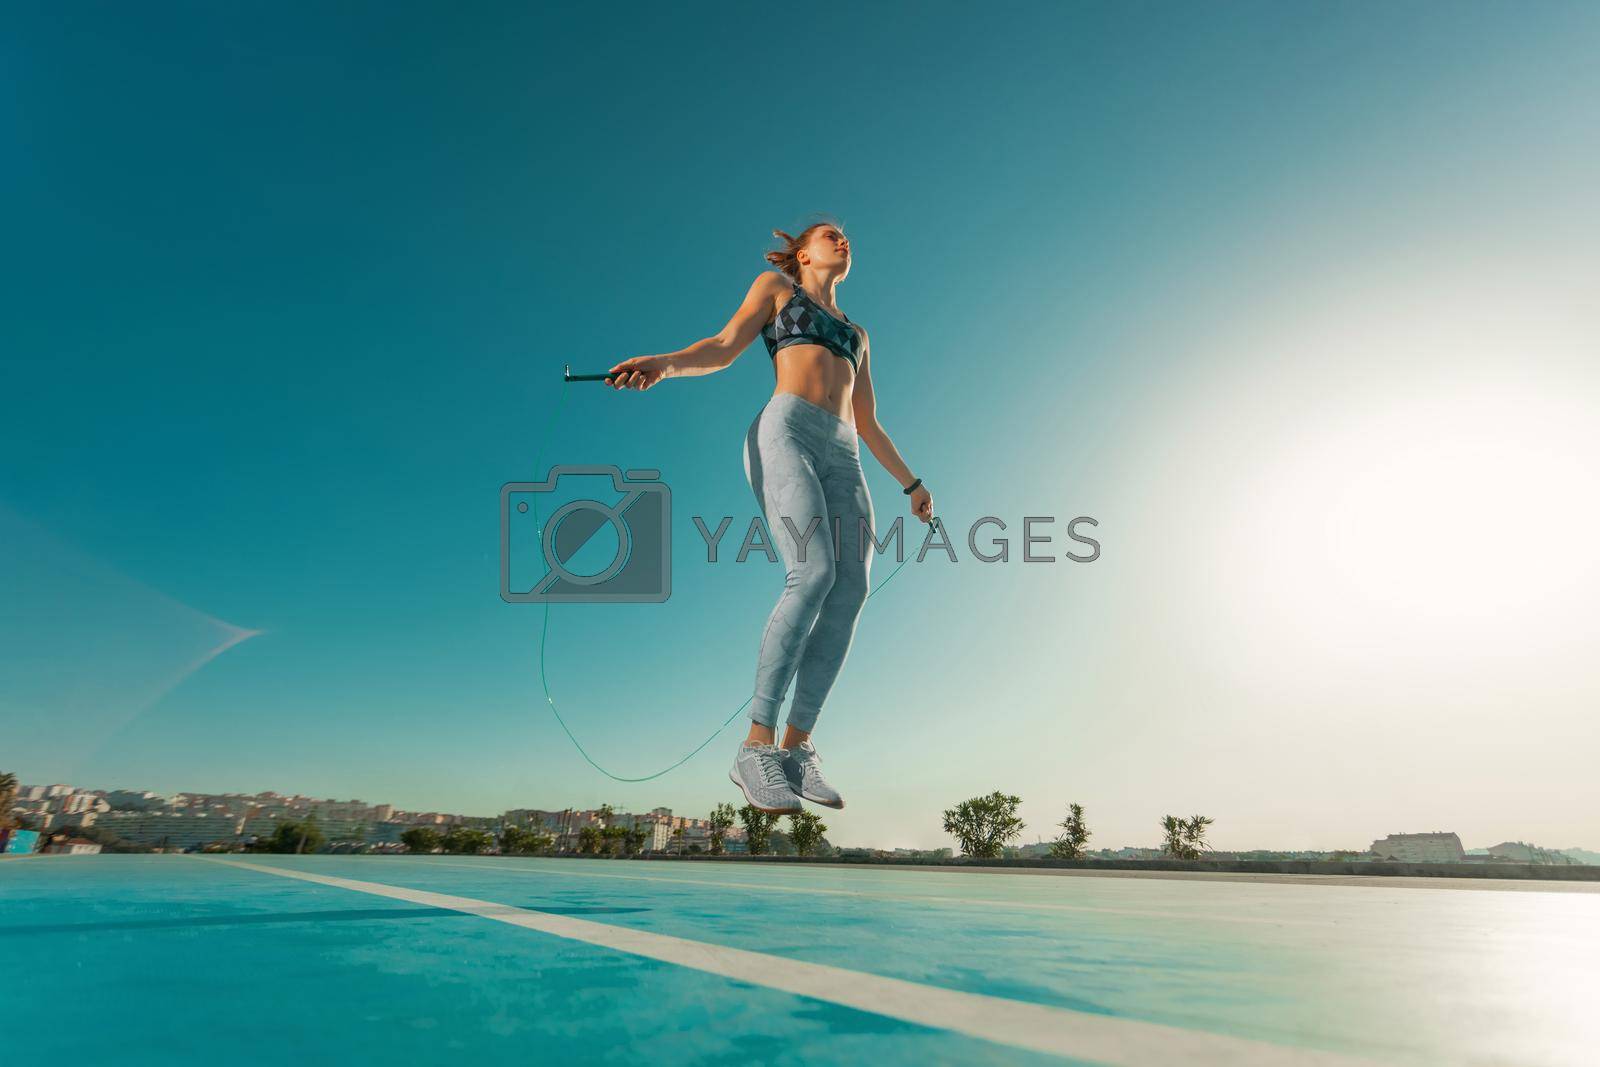 Royalty free image of Young sportswoman training jumping on an agility ladder coordinating outdoors by MikeOrlov